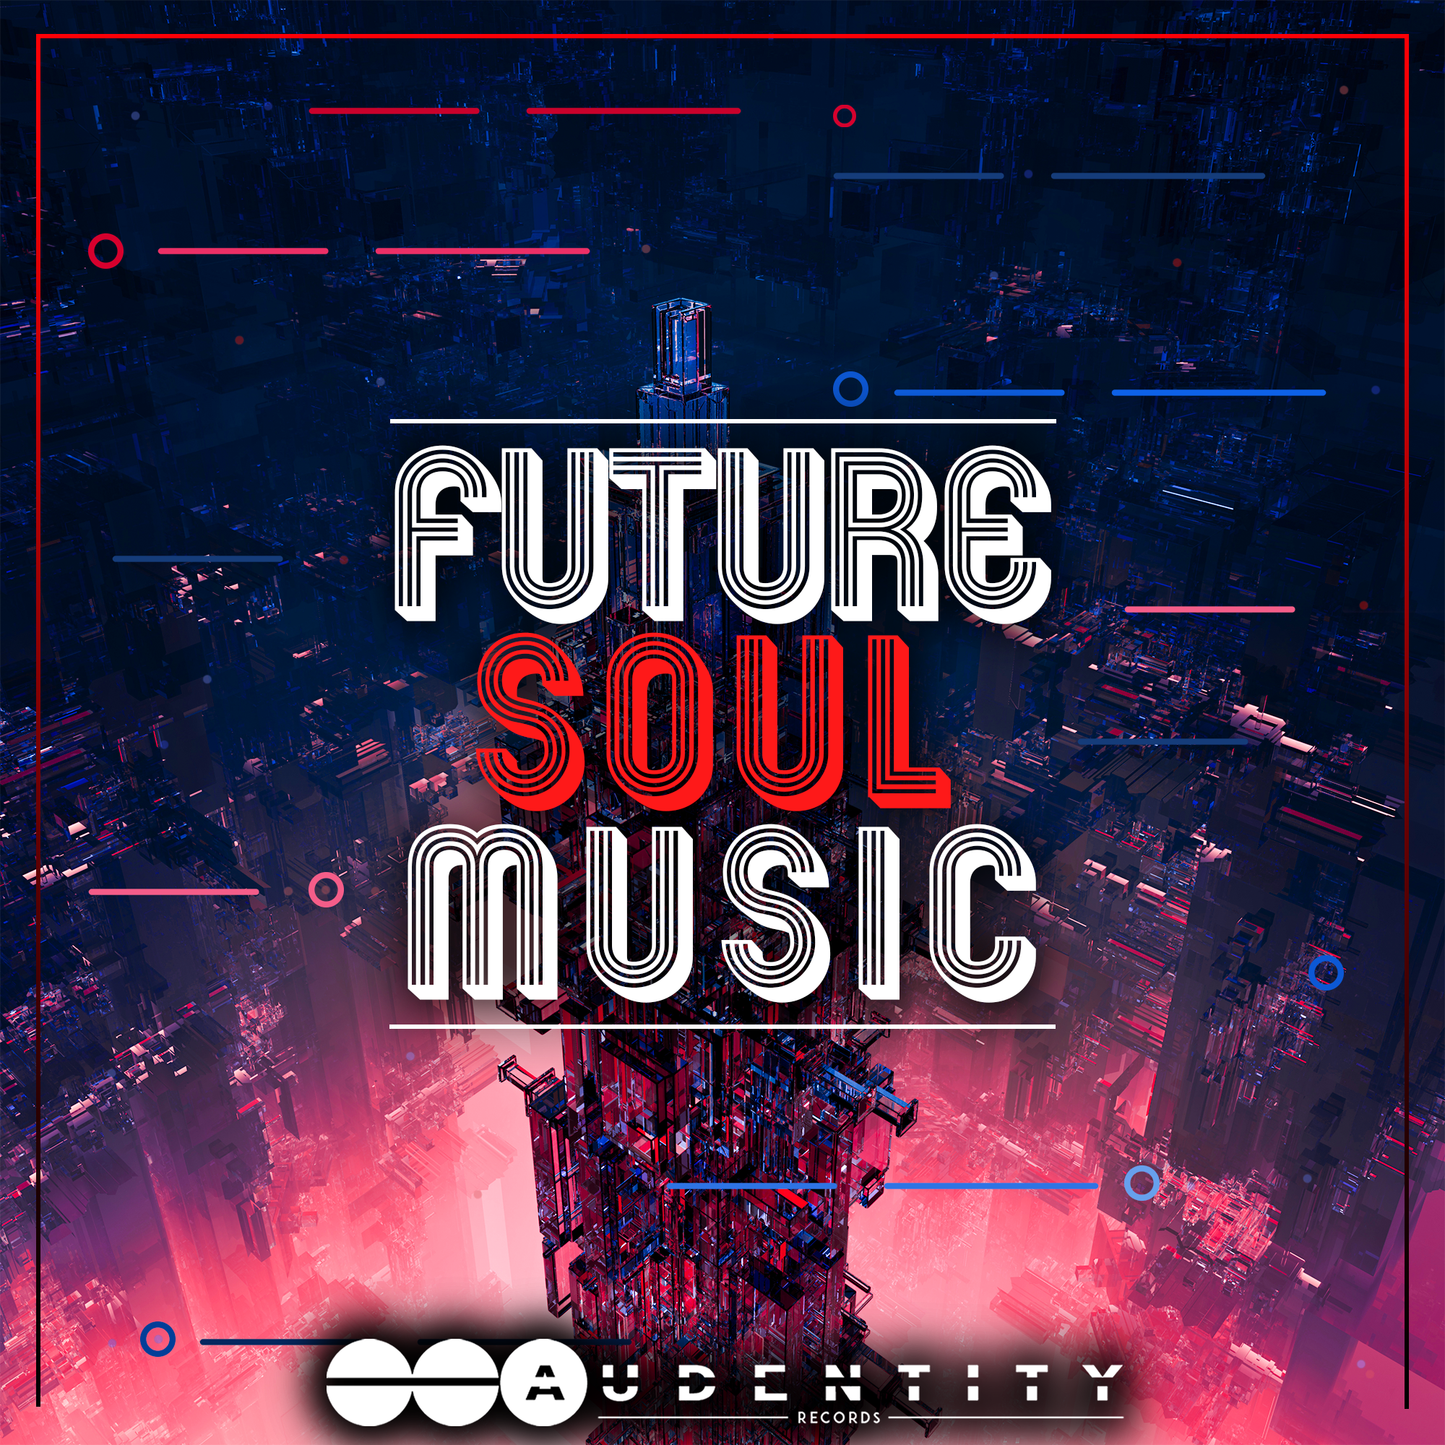 Download Future Soul Music, a huge sounding samplepack by Audentity Records